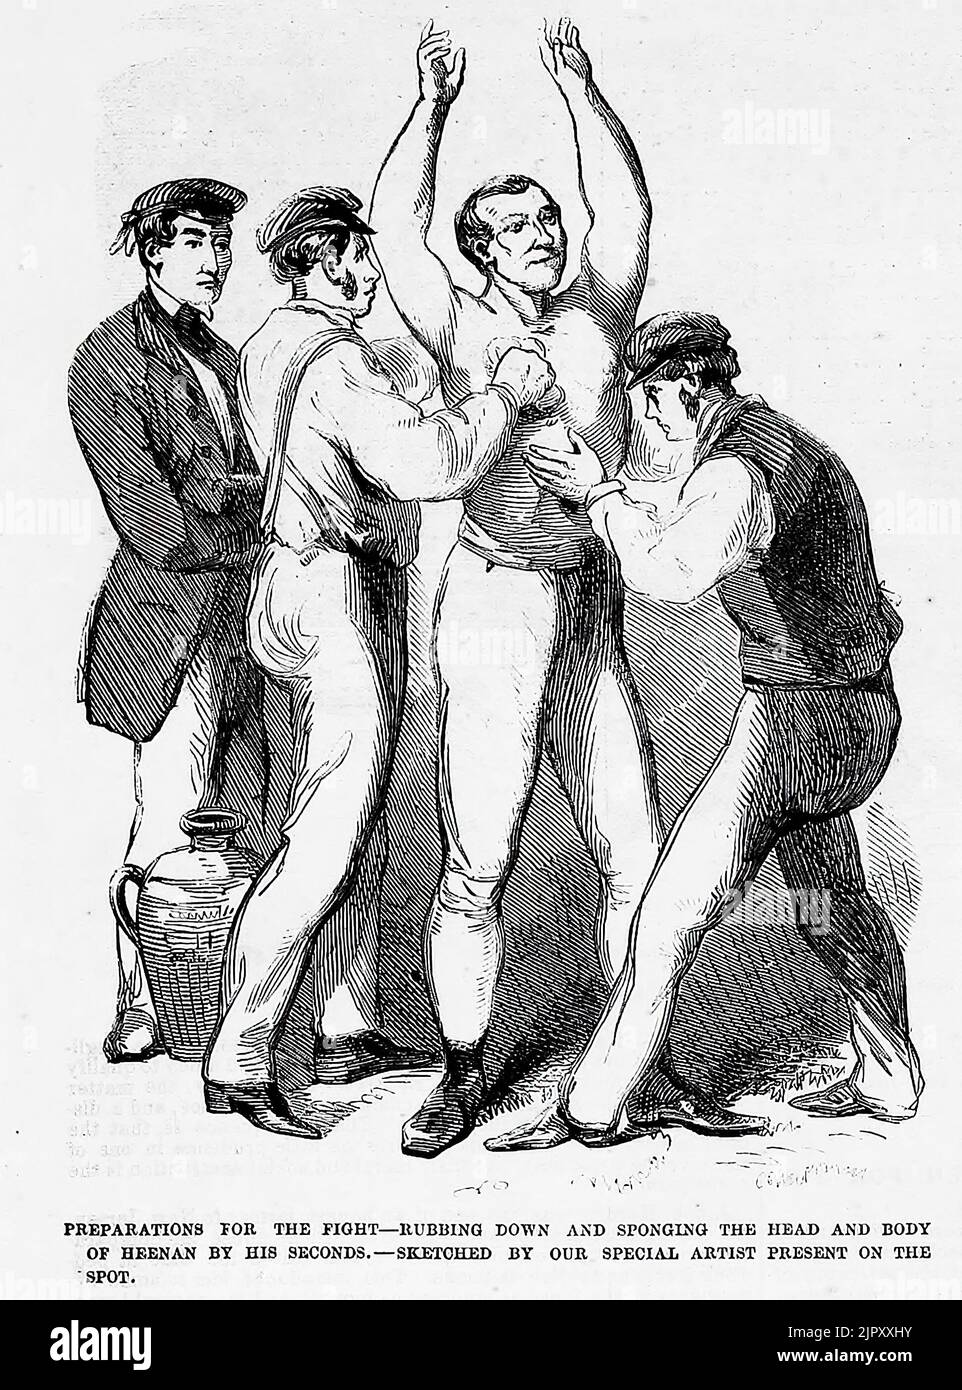 Preparations for the fight - Rubbing down and sponging the head and body of John C. Heenan by his seconds, April 17th, 1860. 19th century illustration from Frank Leslie's Illustrated Newspaper Stock Photo